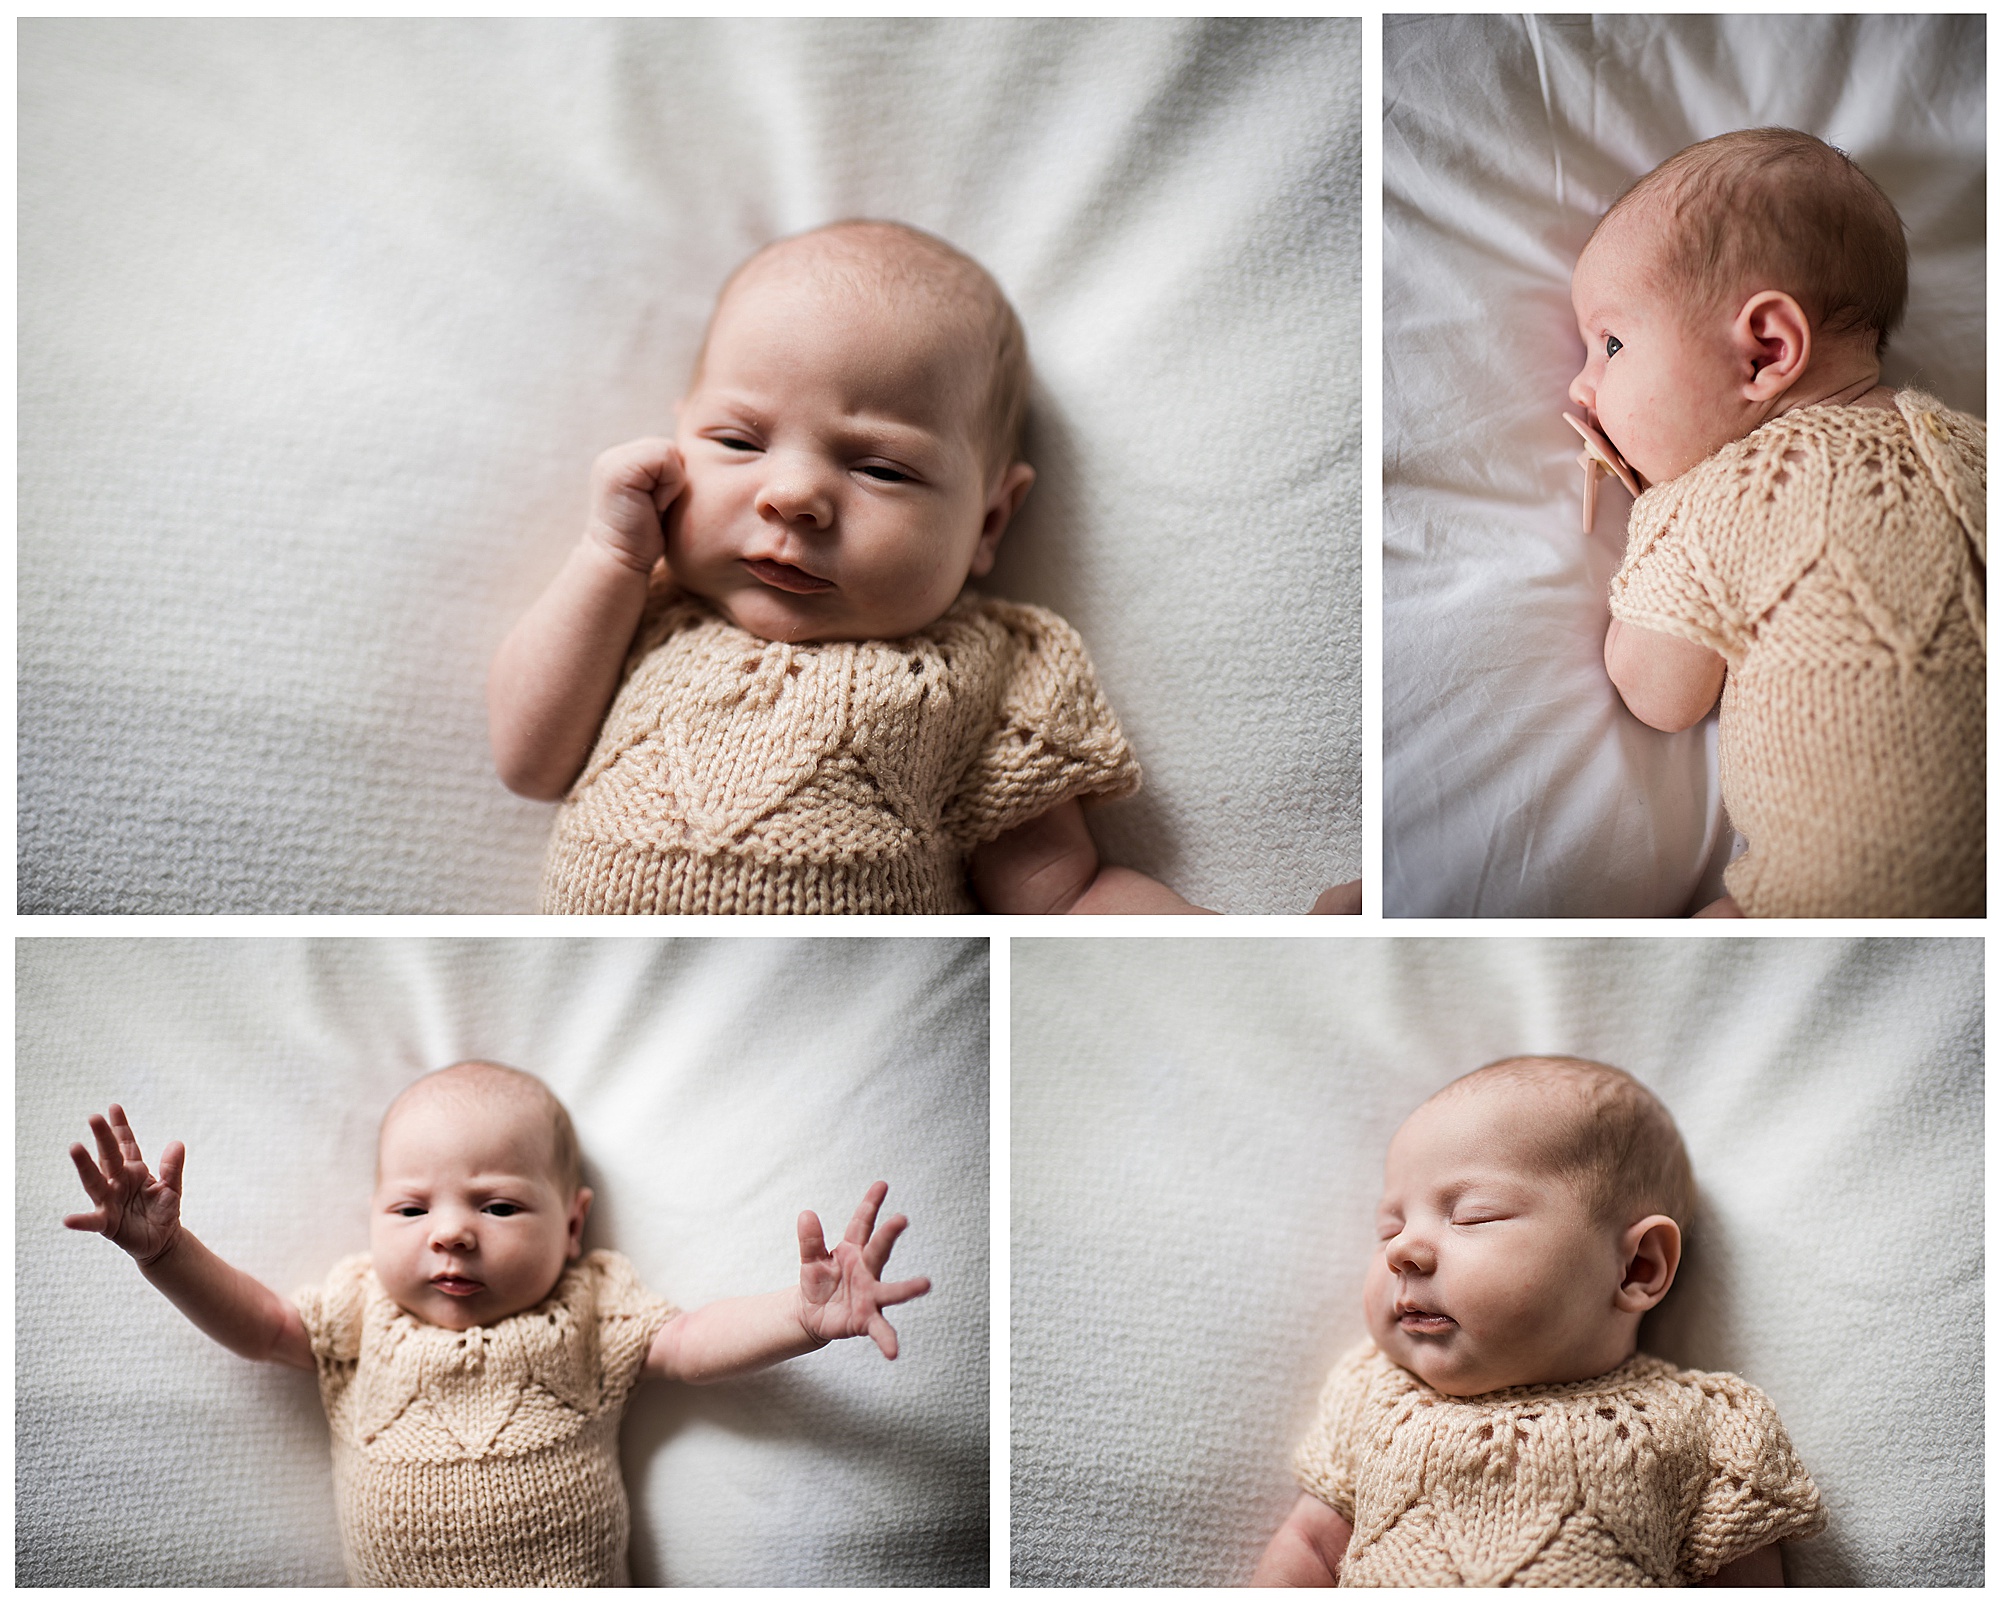 Newborn baby girl with knit crochet onesie in home lifestyle photoshoot Emily Ann Photography Seattle Photographer